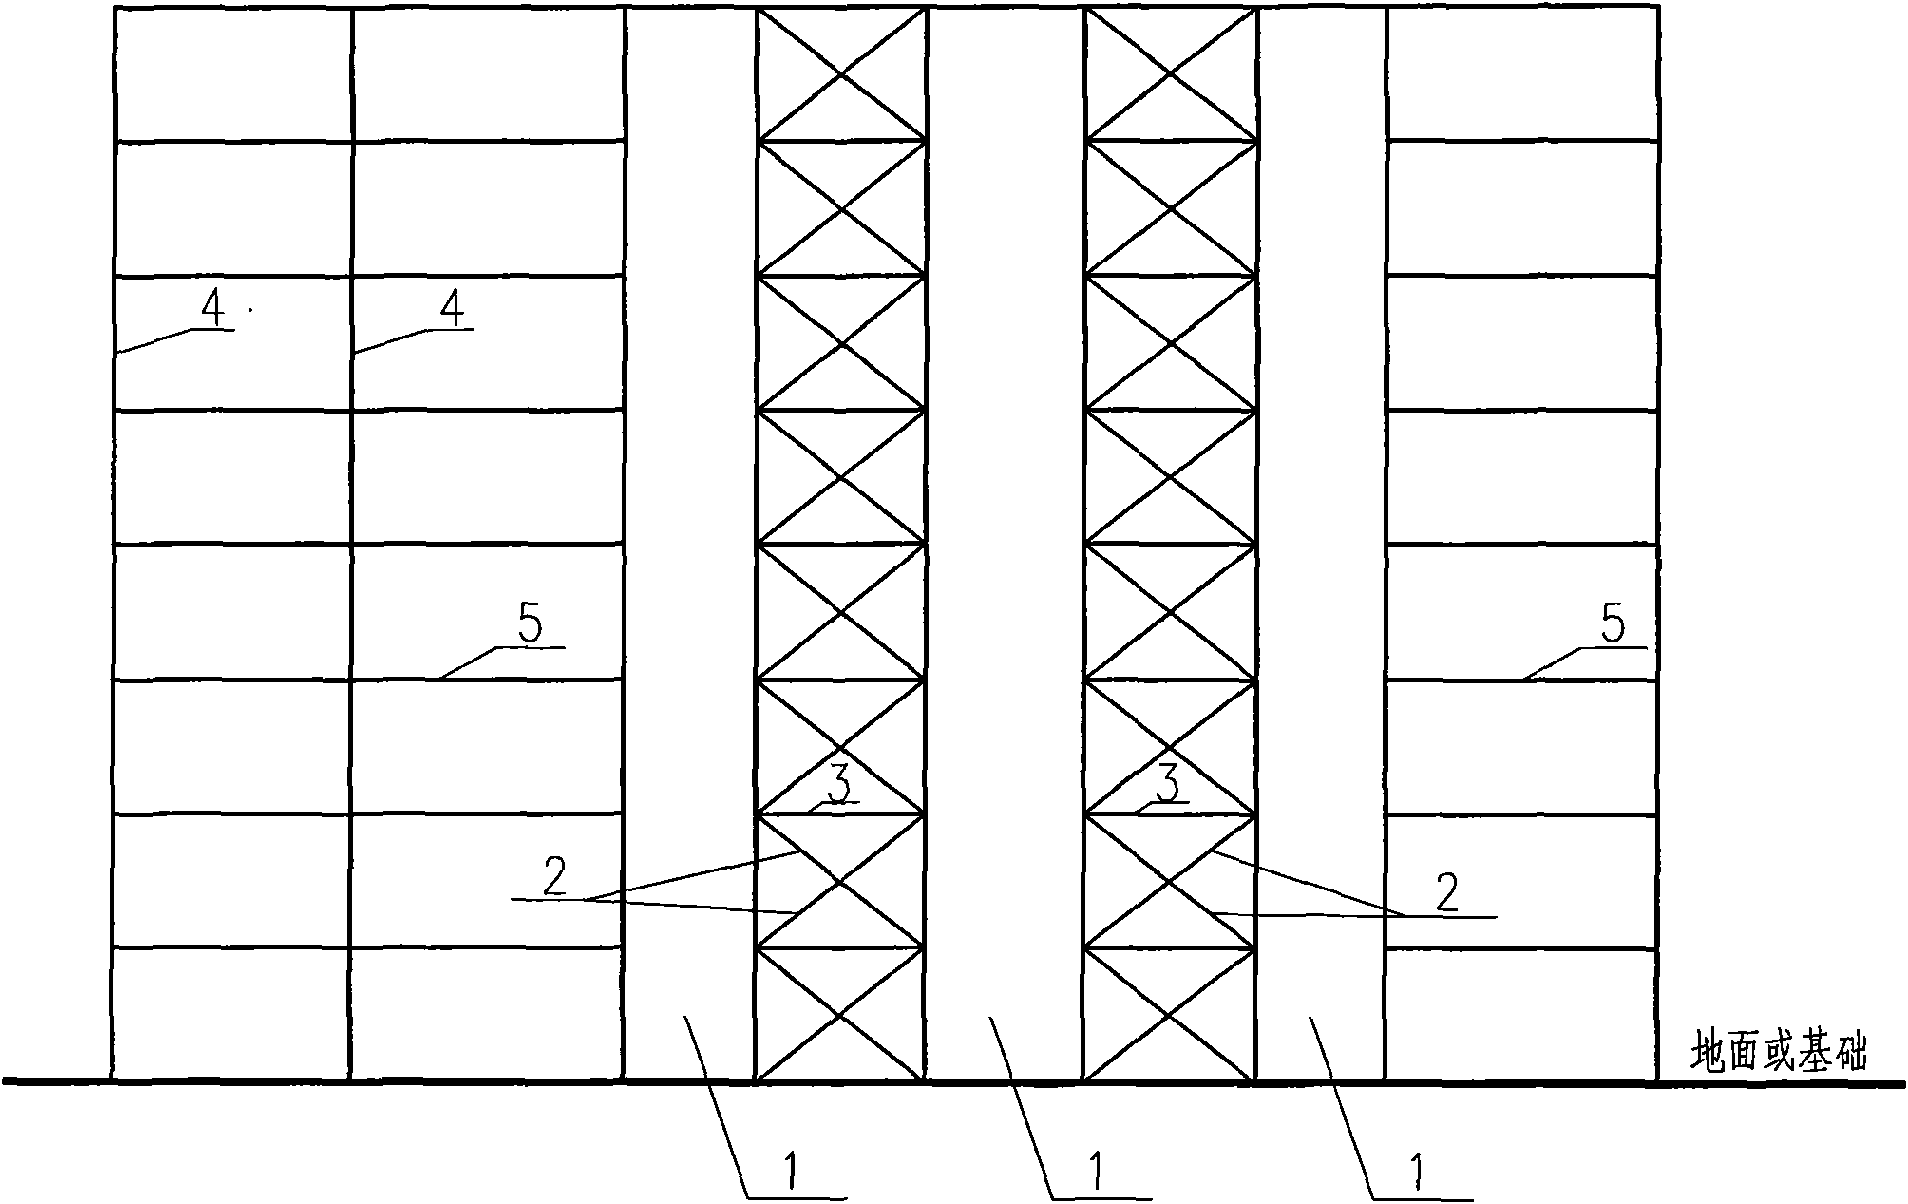 Shear wall truss hybrid type lateral resisting structure system